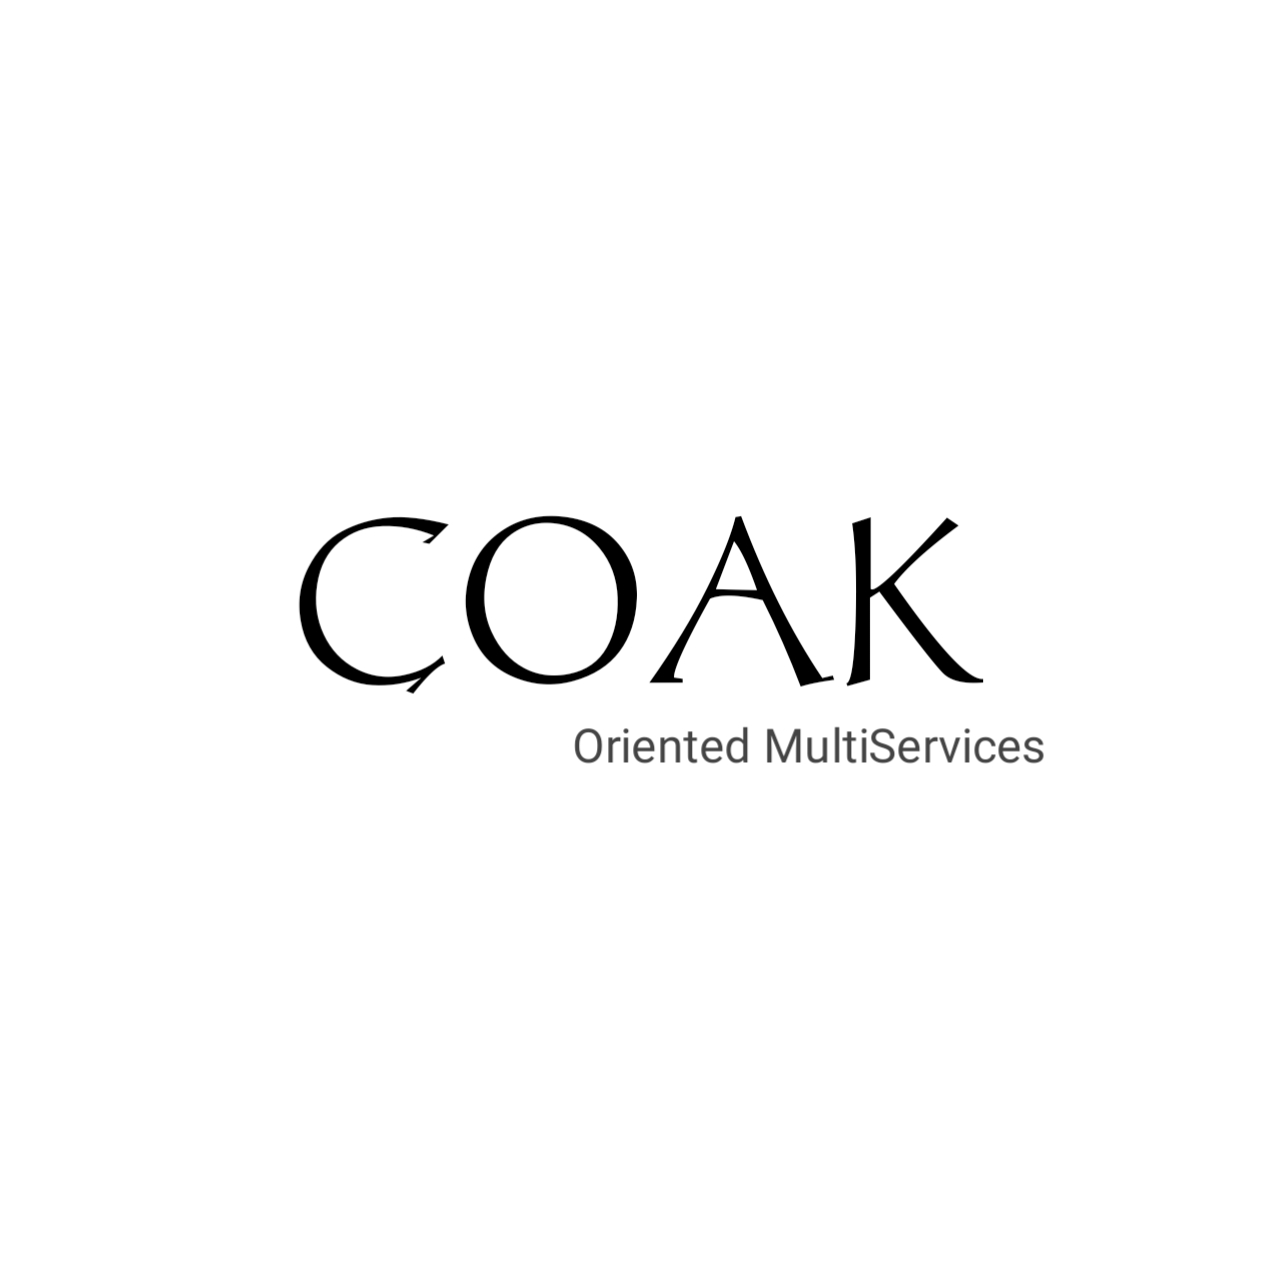 Pay coakorientedmultiservices on UfitPay.com